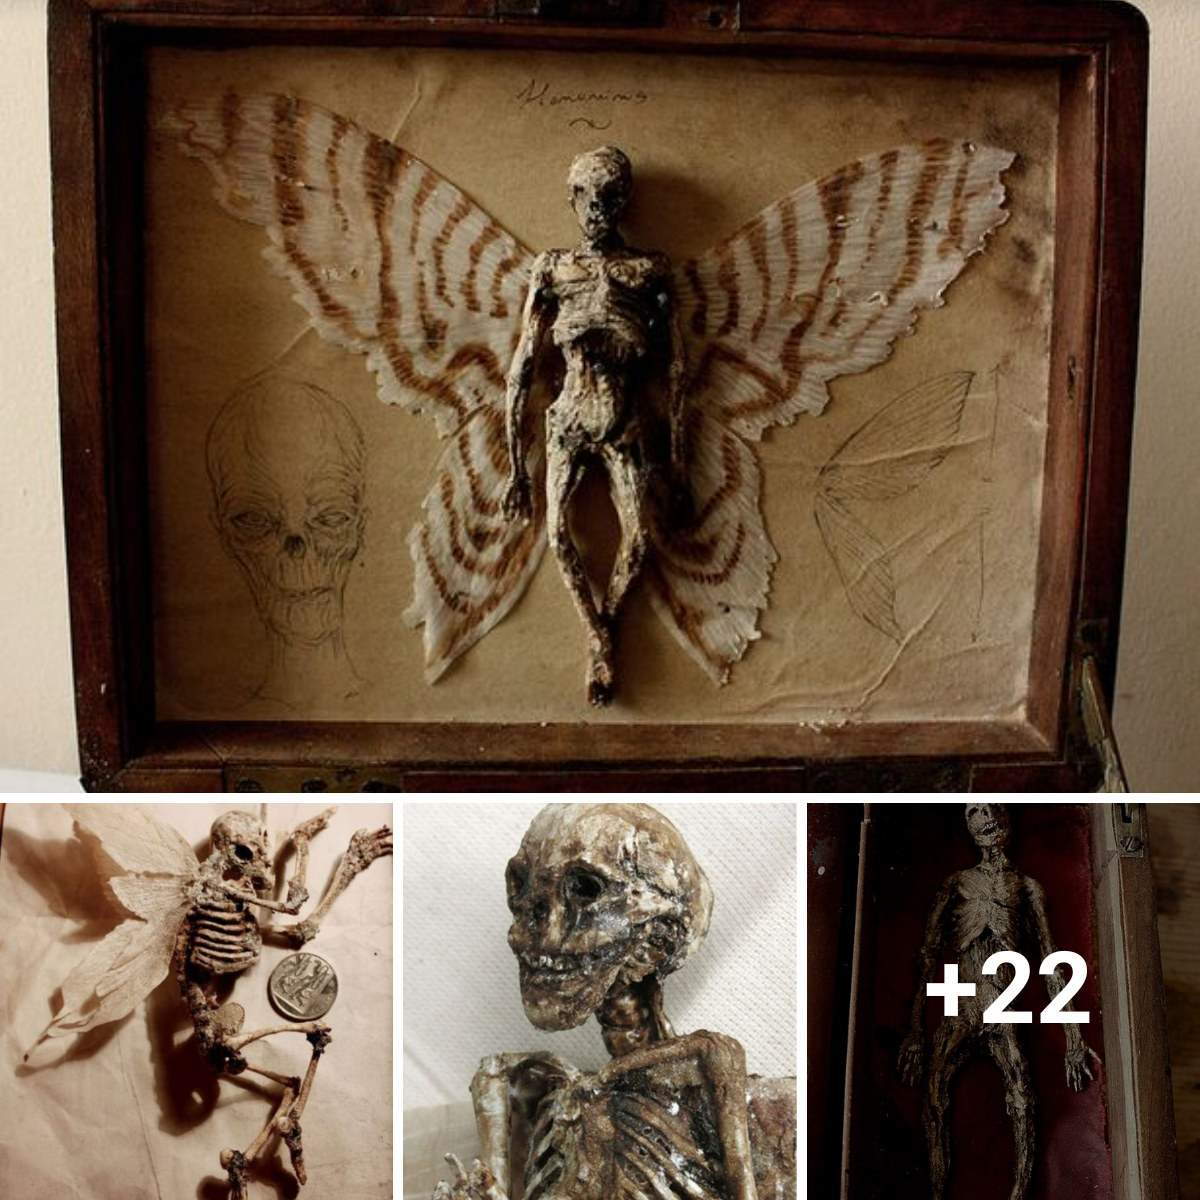 Uncovered Secret Of Winged Tiny “Human Skeletons” In “Ancient London Home Basement”